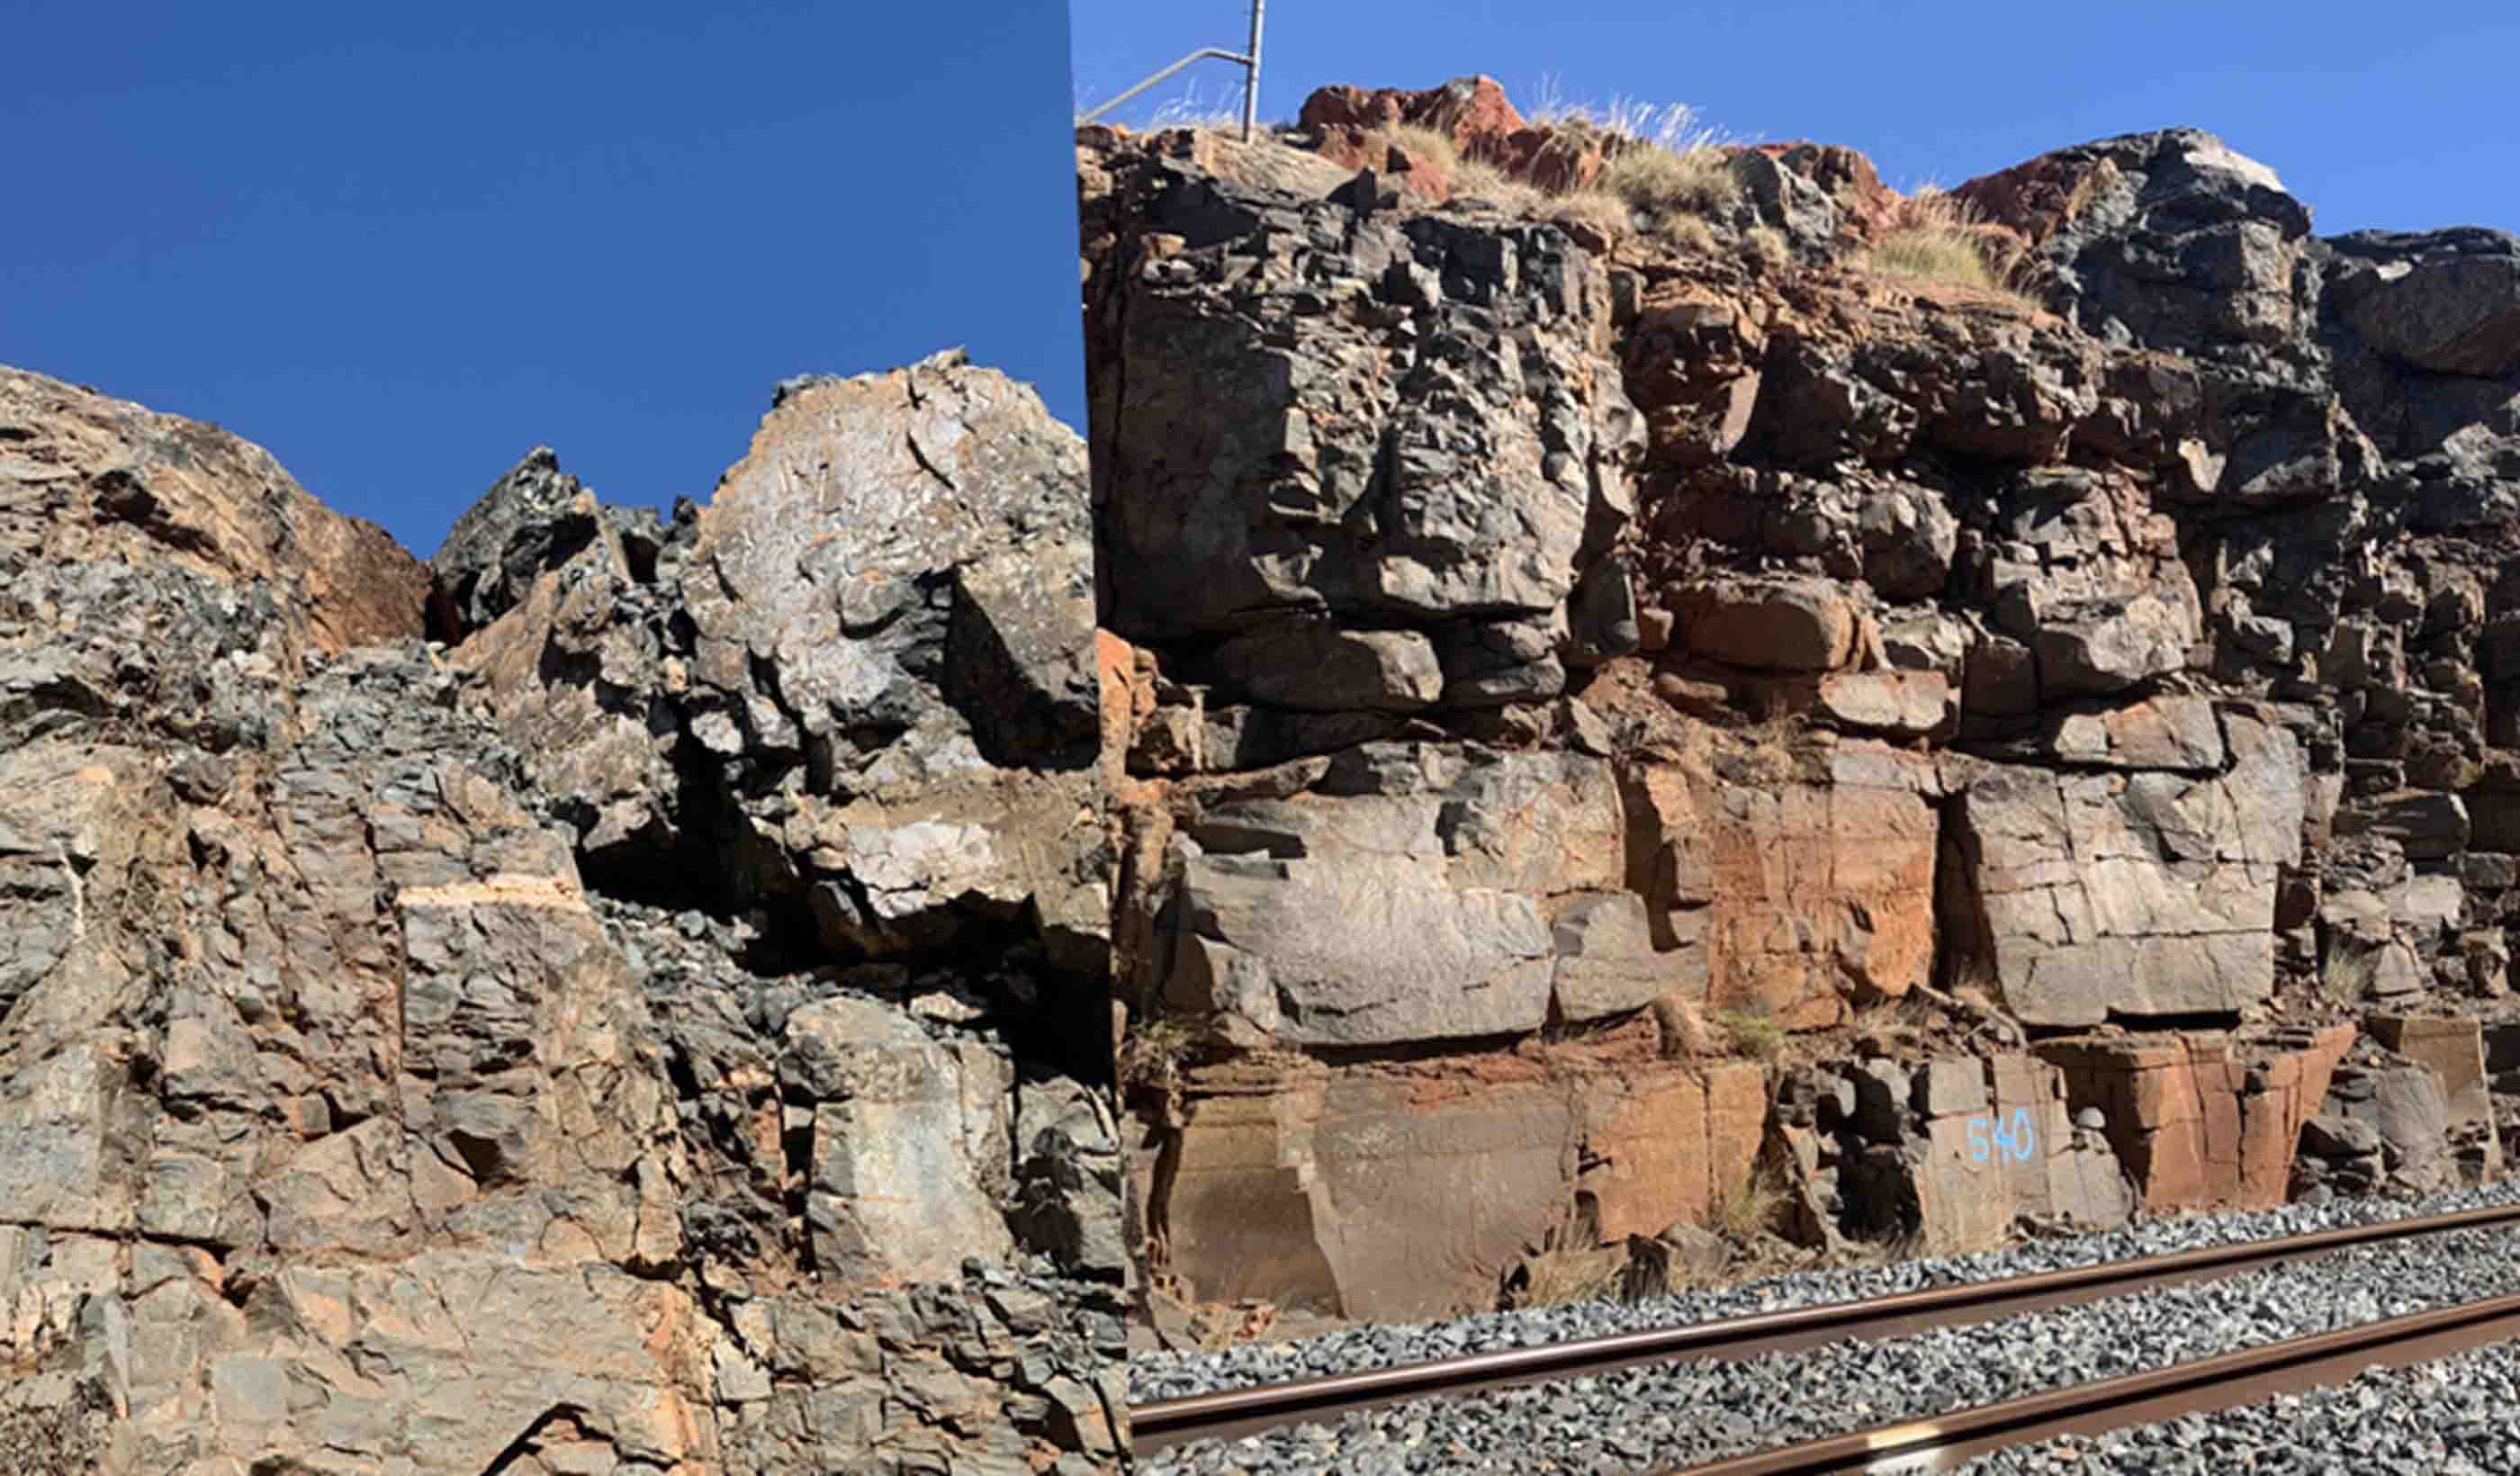  Slope Risk Management for a Mining Rail Network